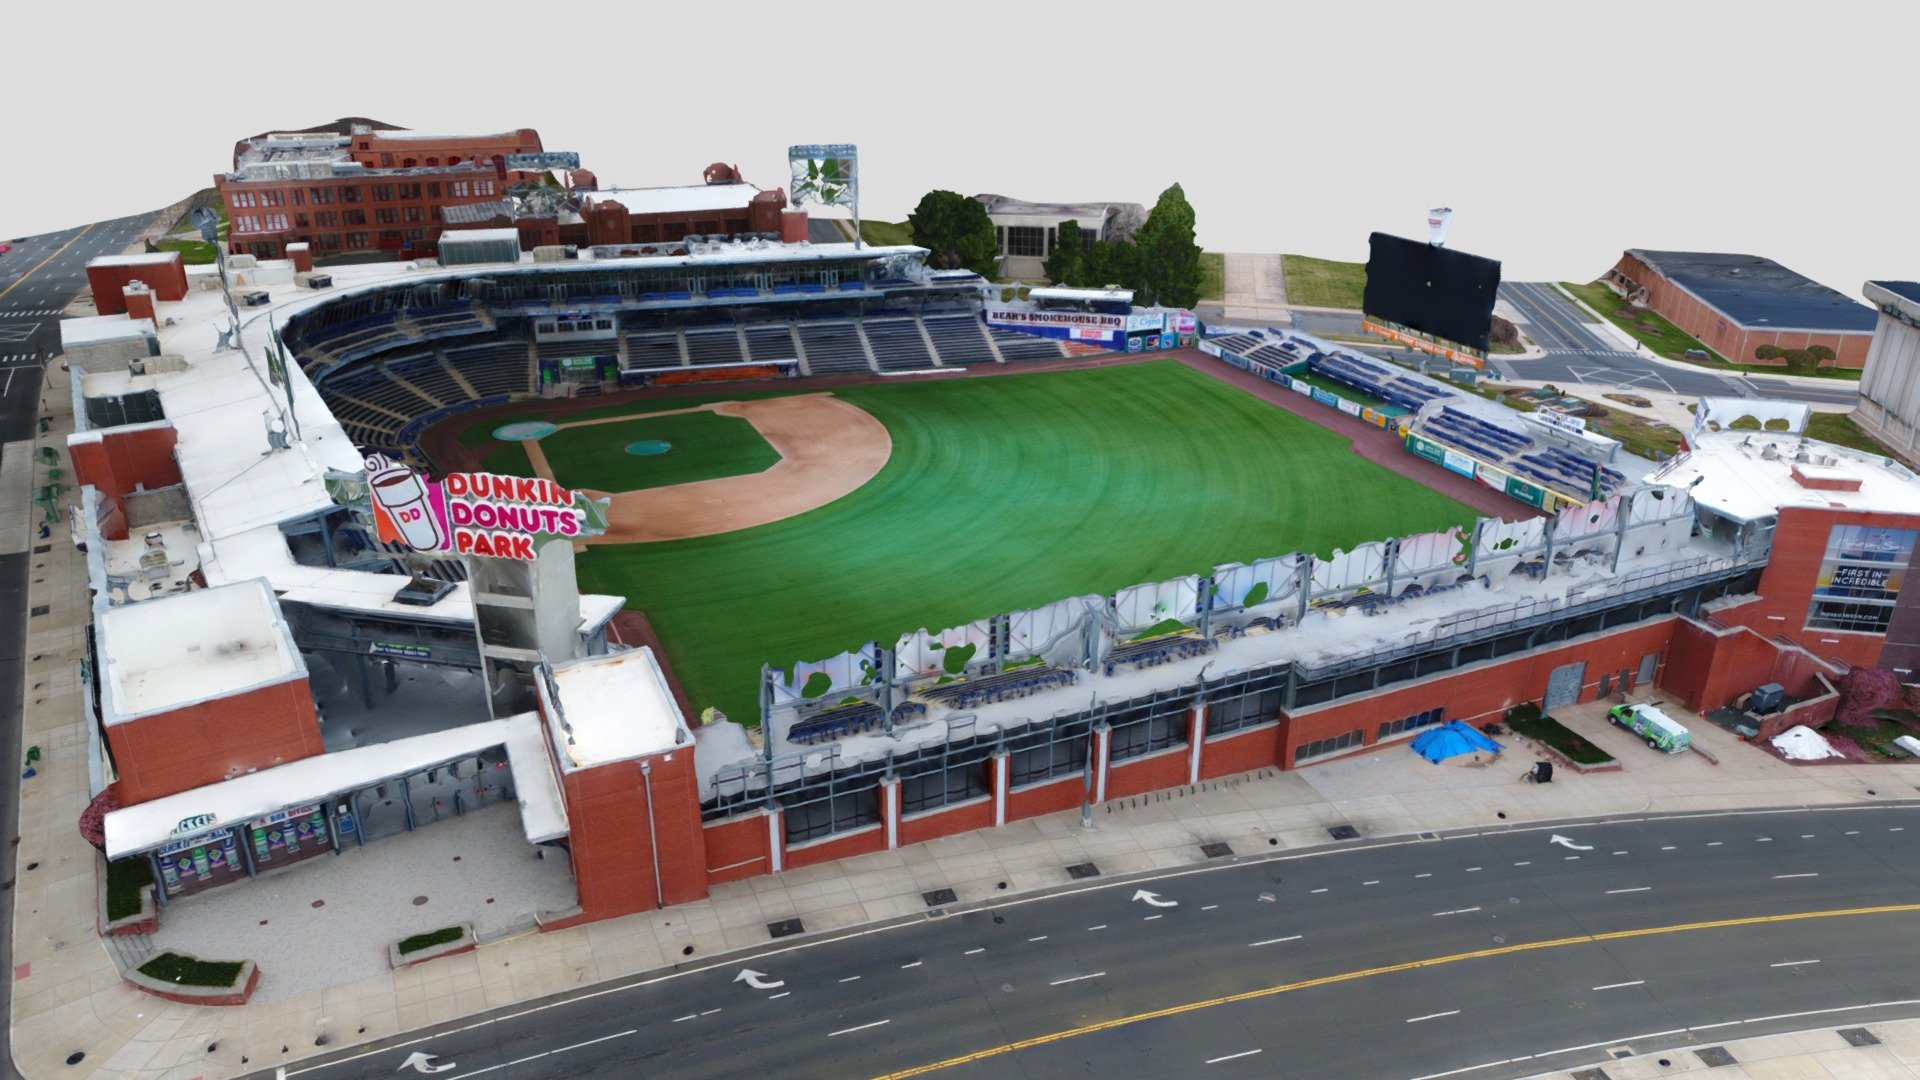 Dunkin Donuts Park Hartford CT - 3D model by Trident Aerial Imagery  (@DroneGlastonbury) [9f71af3]